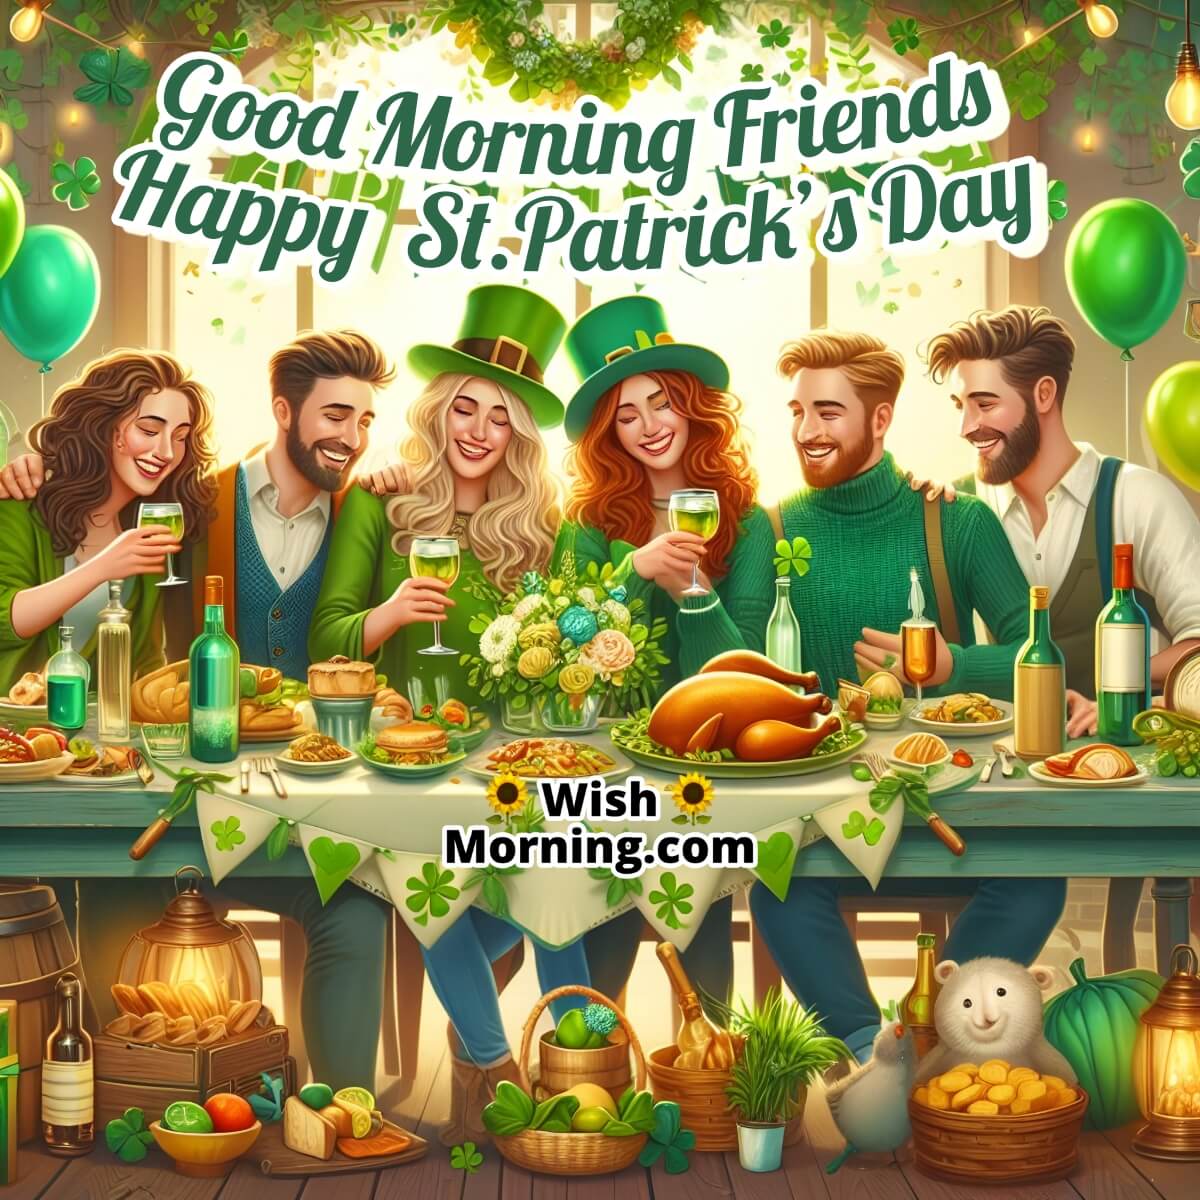 Good Morning Friends St. Patrick's Day